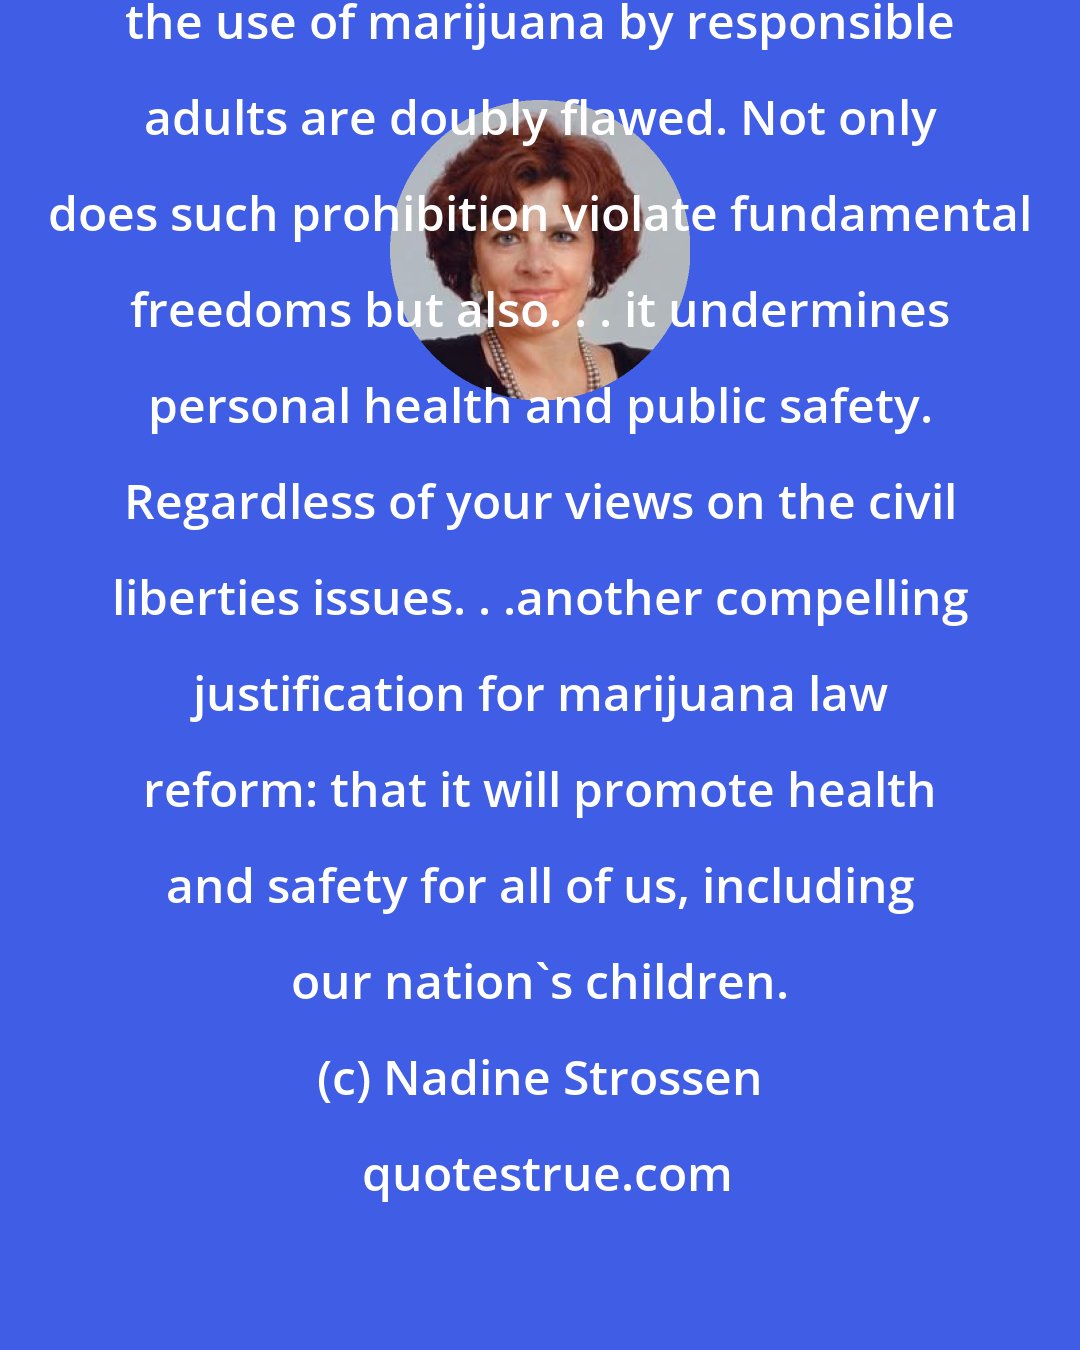 Nadine Strossen: Our current draconian laws prohibiting the use of marijuana by responsible adults are doubly flawed. Not only does such prohibition violate fundamental freedoms but also. . . it undermines personal health and public safety. Regardless of your views on the civil liberties issues. . .another compelling justification for marijuana law reform: that it will promote health and safety for all of us, including our nation's children.